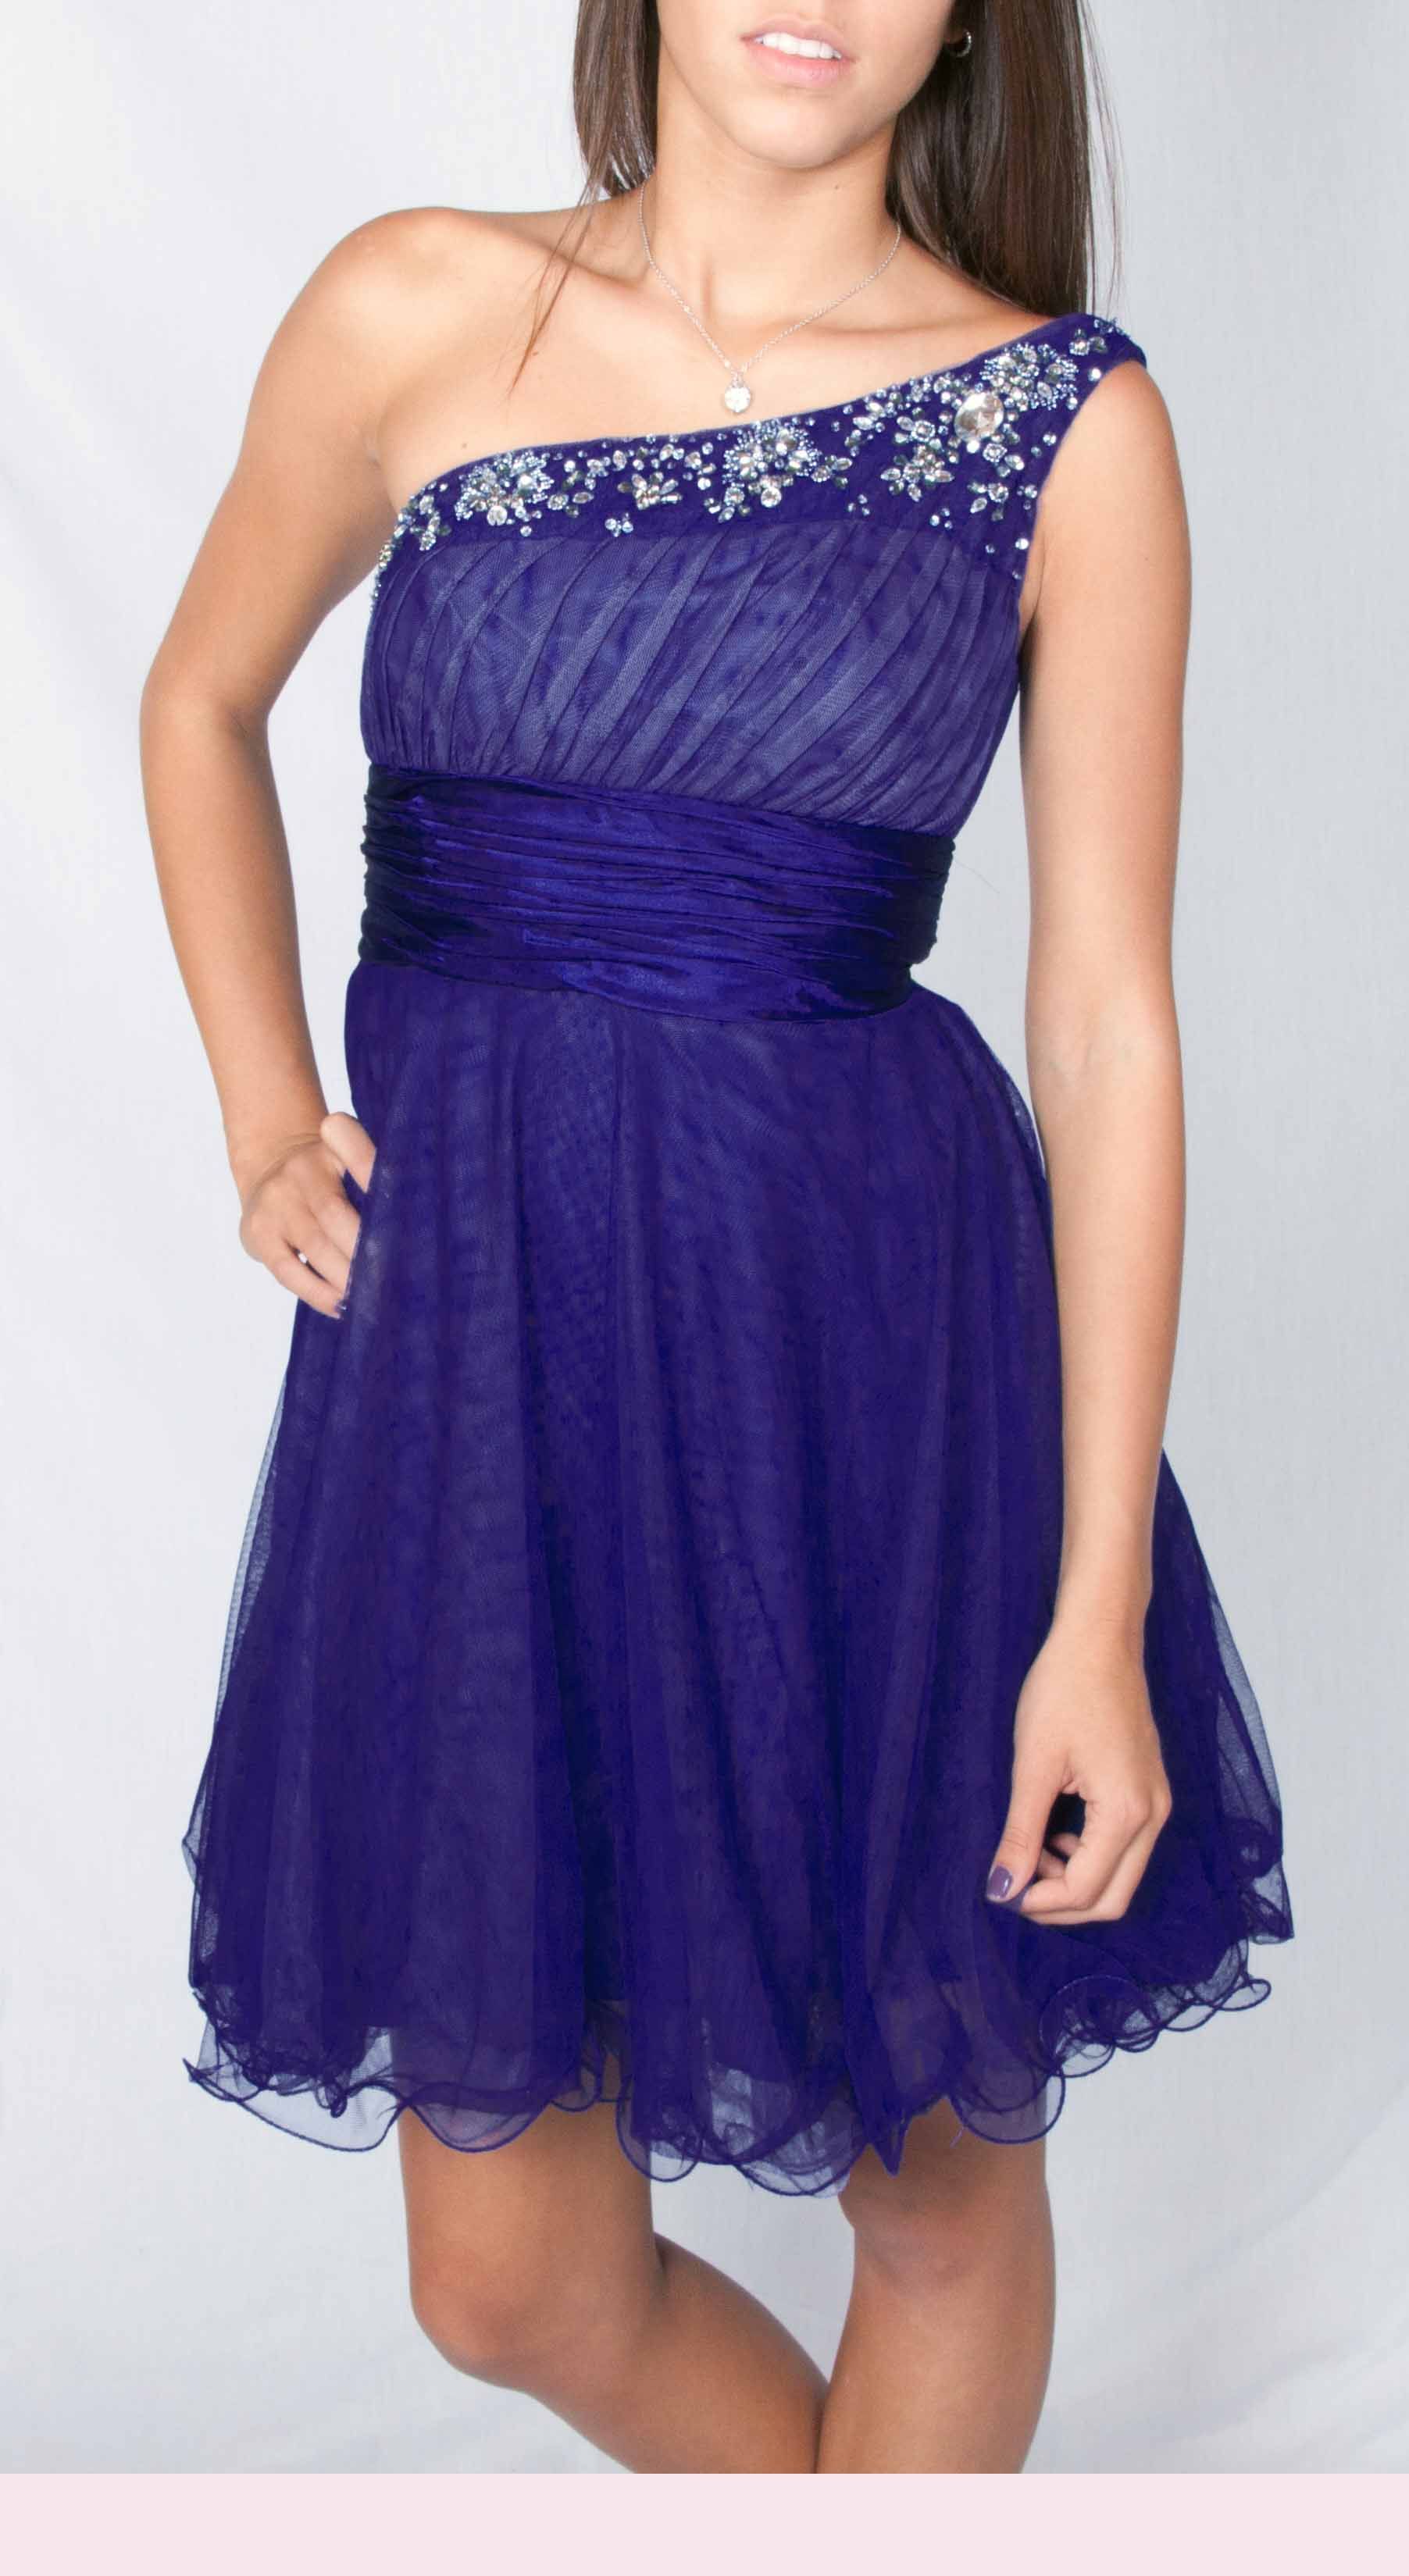 Jump Apparel Homecoming Prom Evening Cocktail Party Dress Gown Size 1 